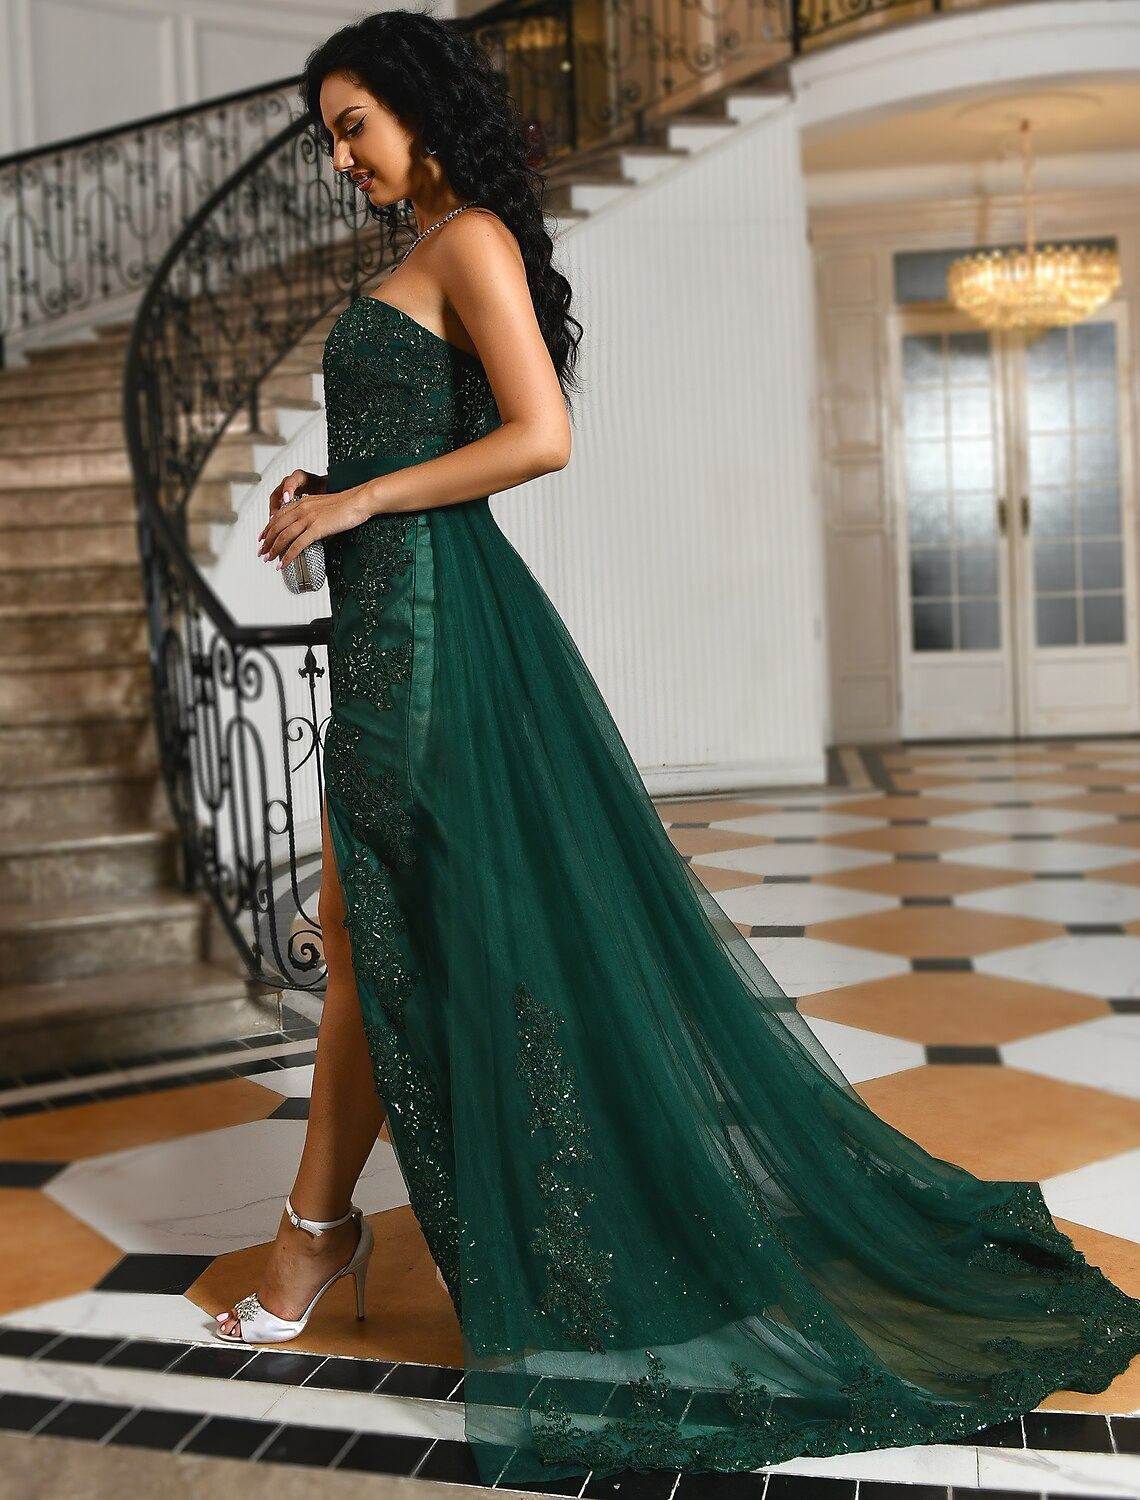 Evening Gown Luxurious Dress Formal Floor Length Sleeveless Sweetheart Charmeuse with Embroidery Appliques